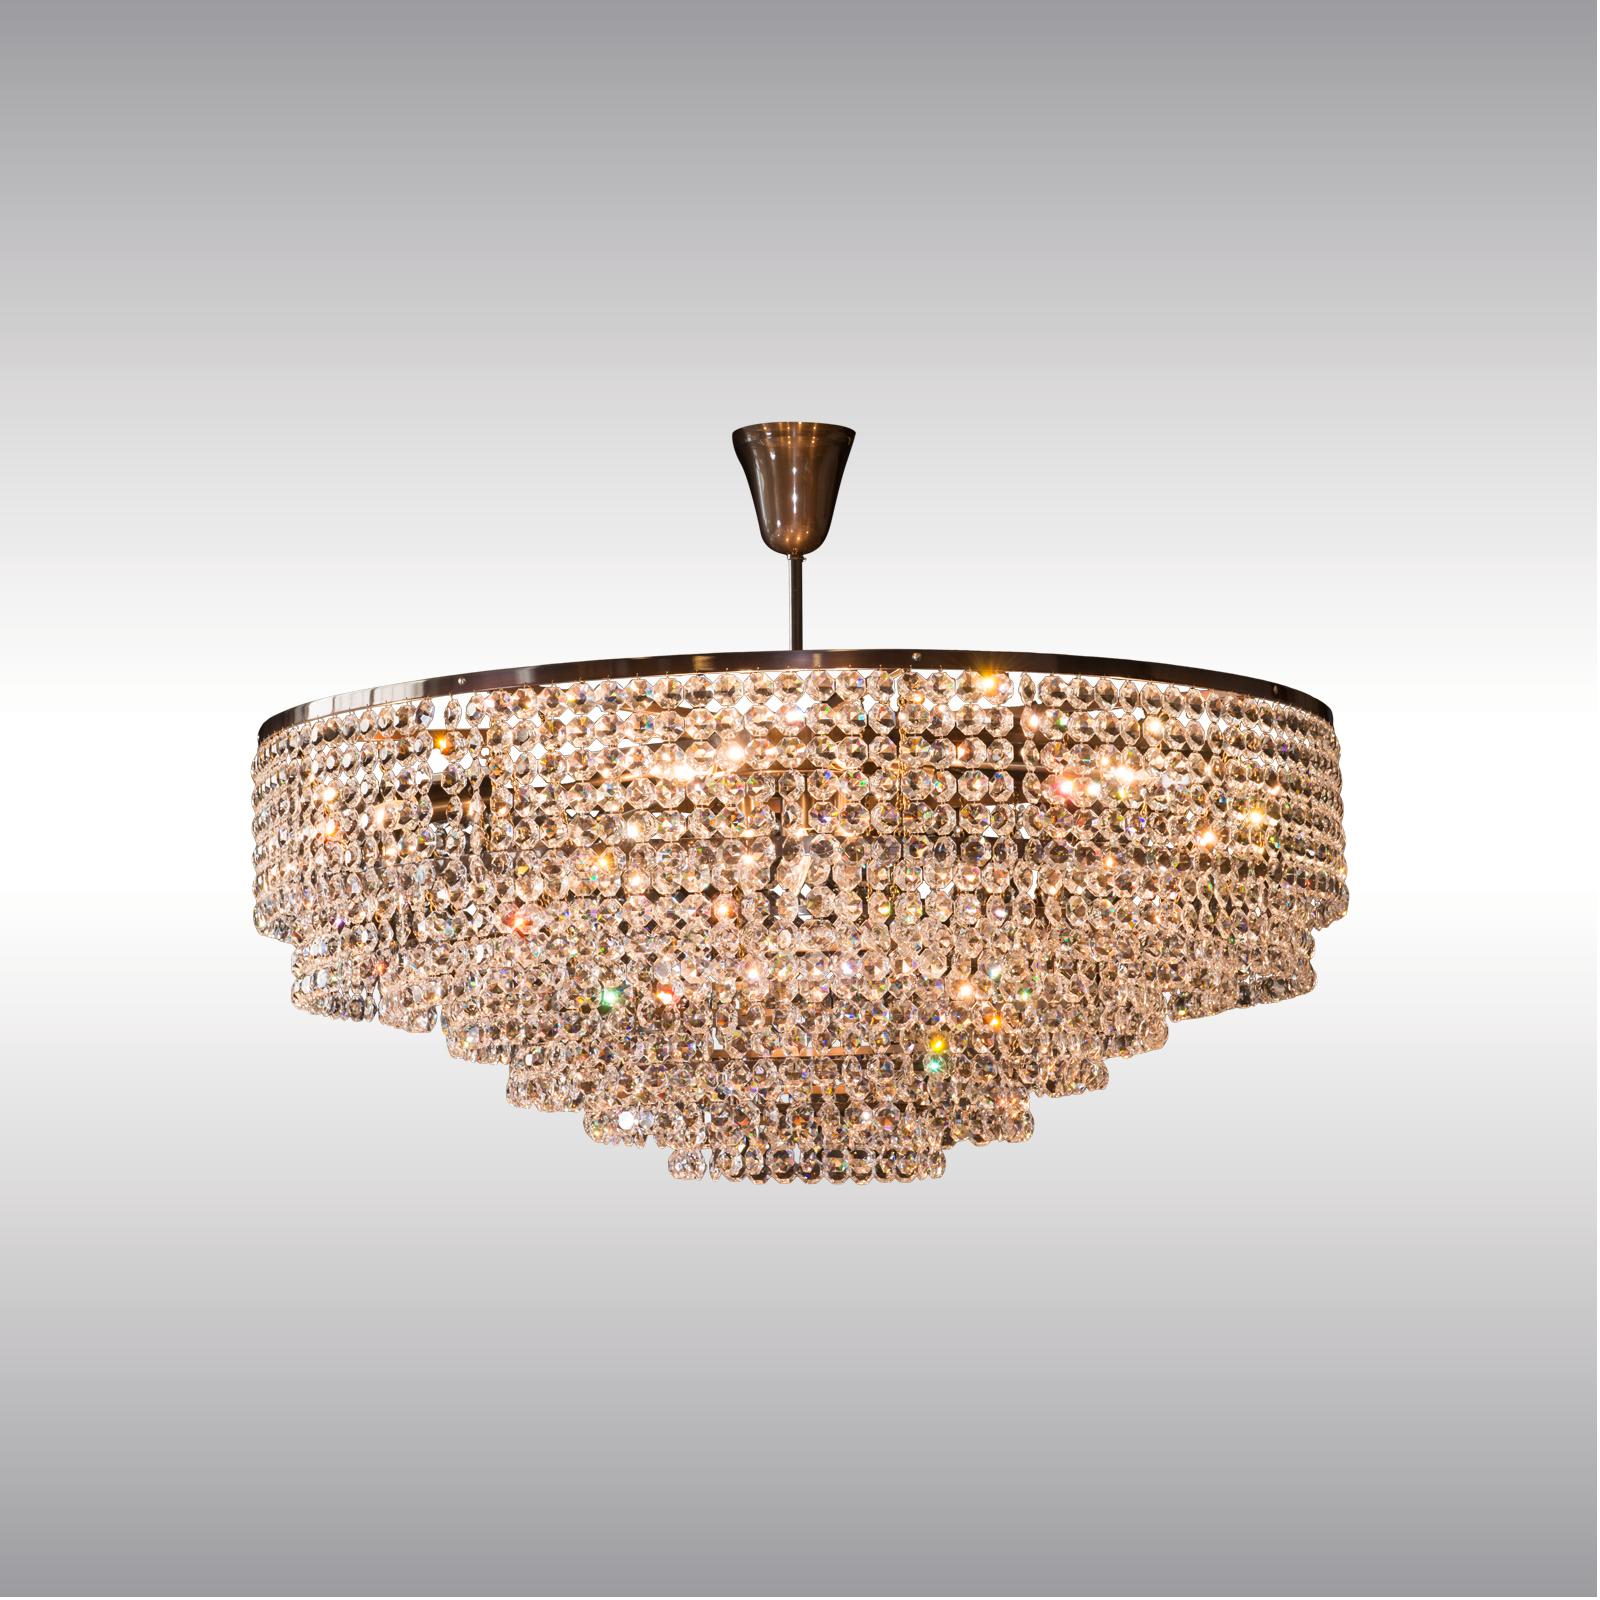 DARK Patina 
Most components according to the UL regulations, with an additional charge we will UL-list and label our fixtures

Big crystal chandelier in the style of the 1960ies, size of the roughly 2000 glass-stones is 30mm, the length of the stem